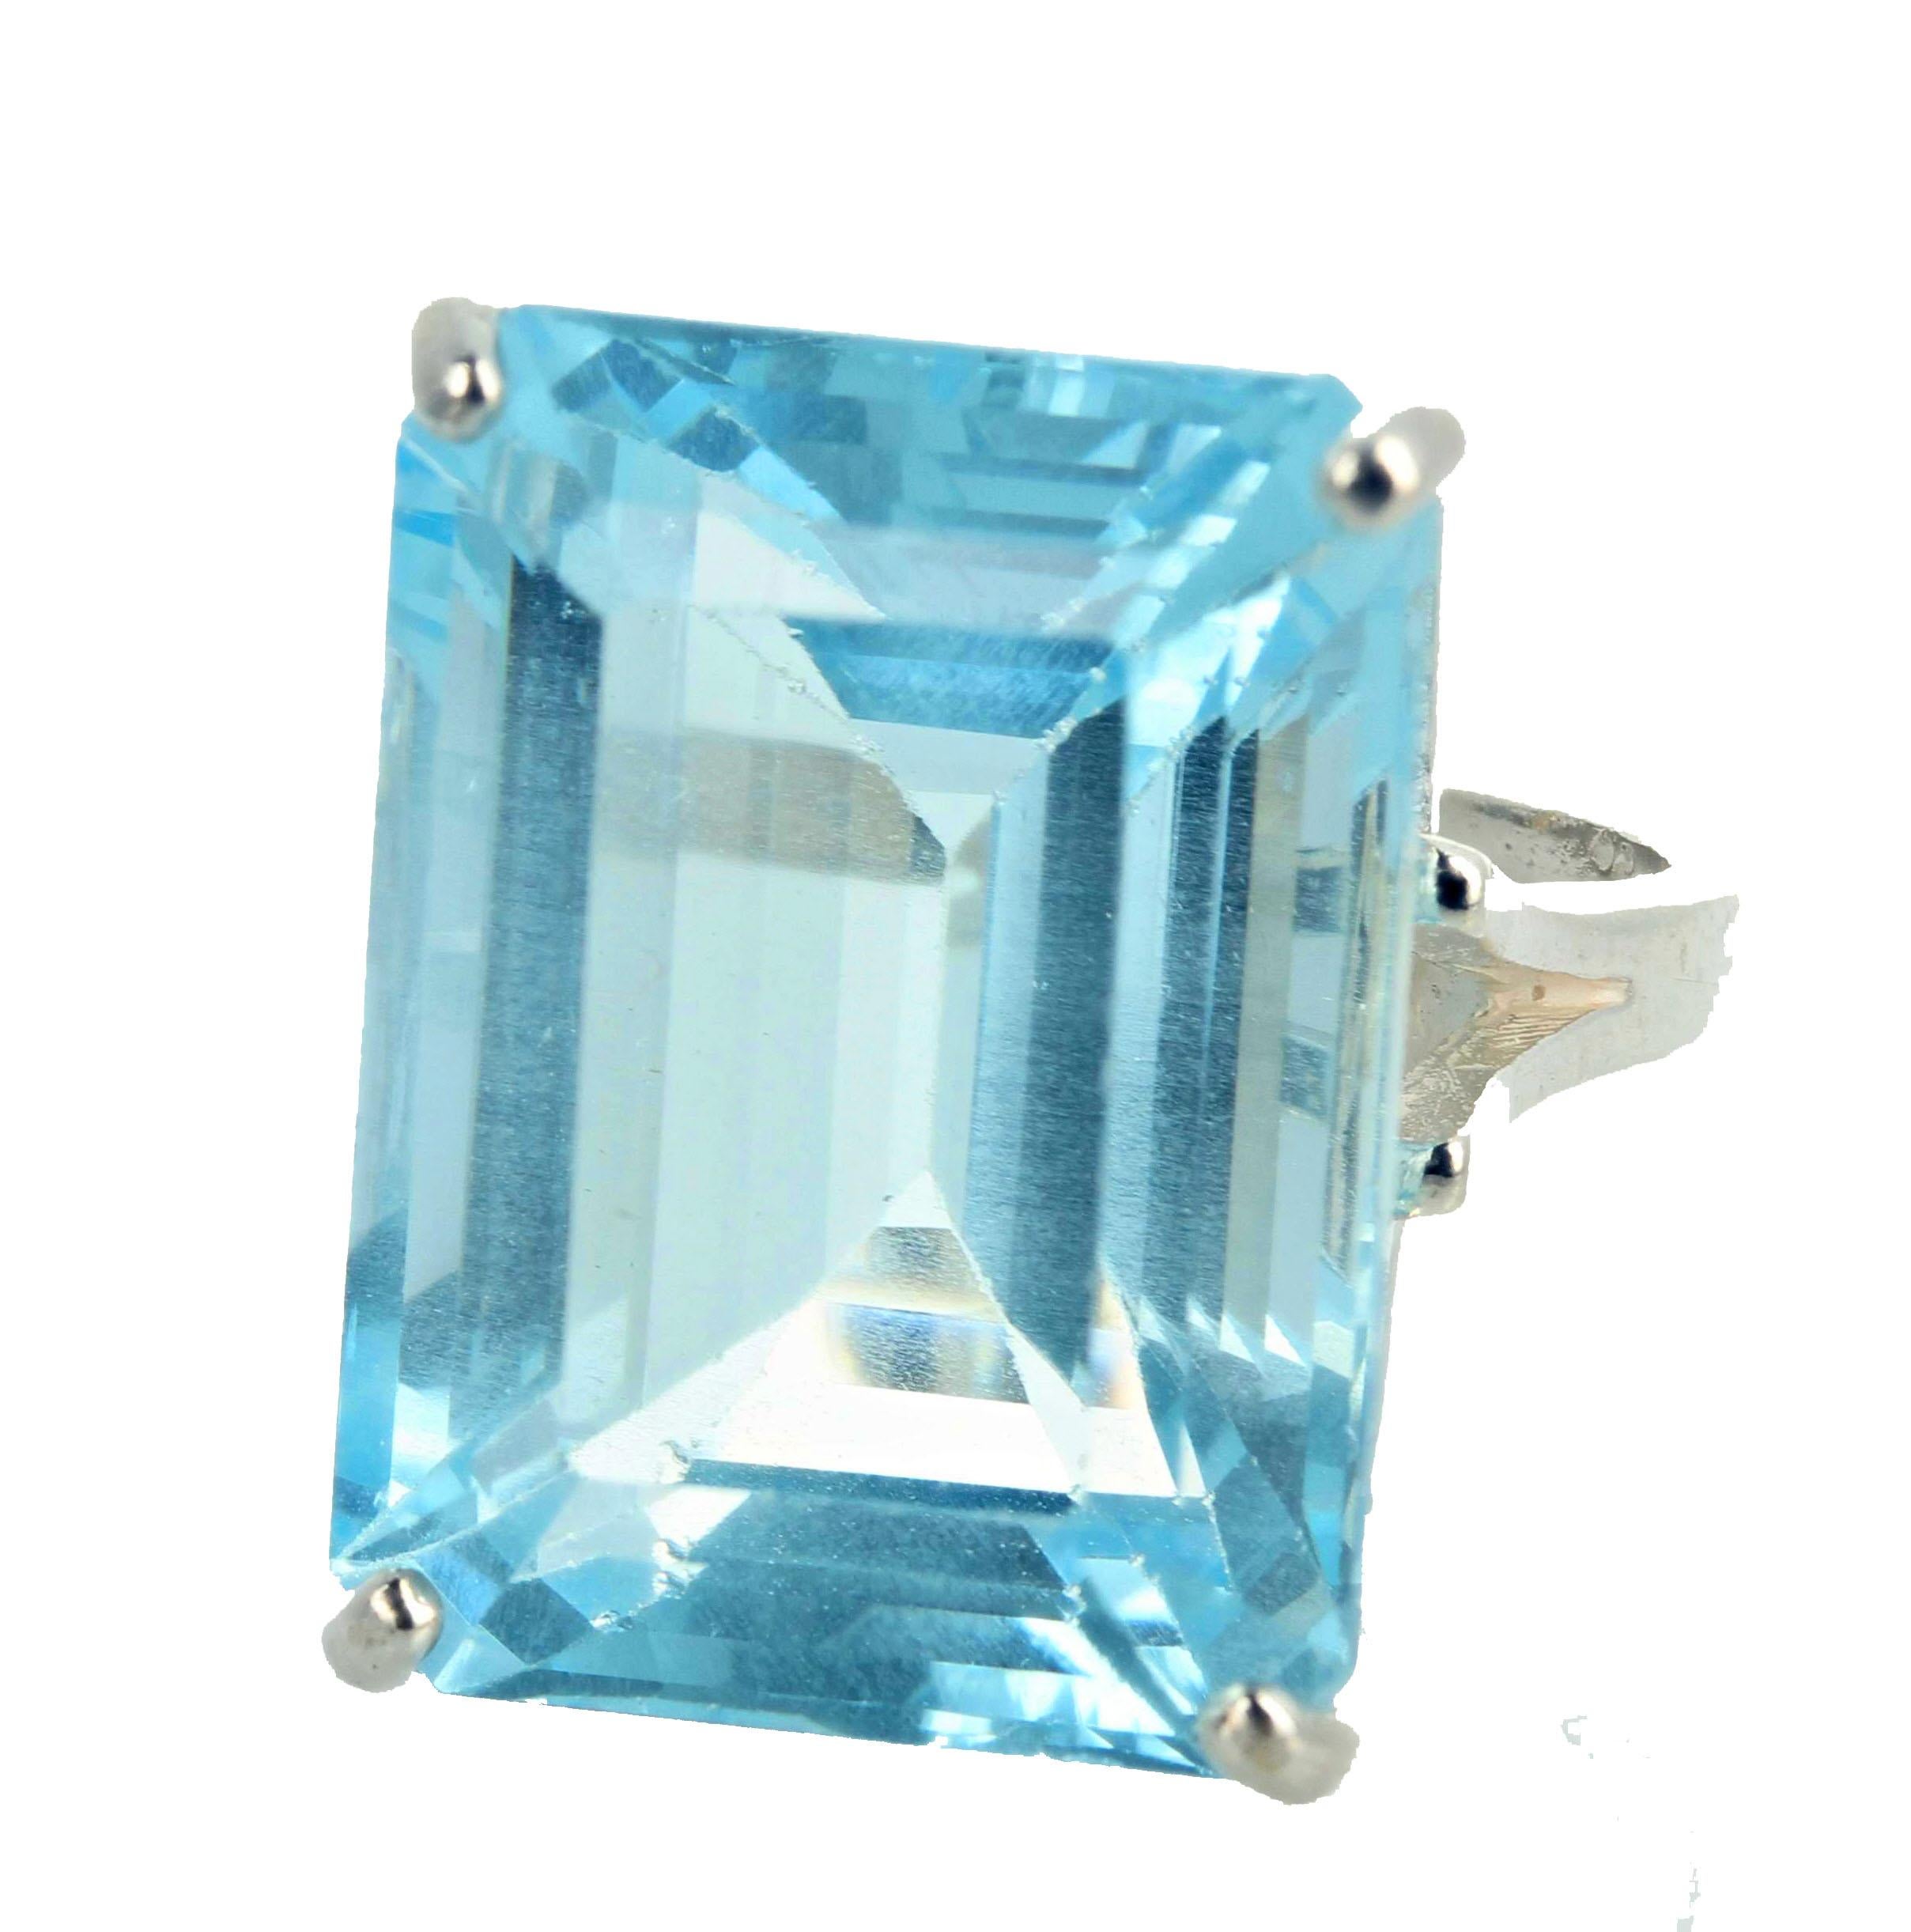 Translucent magnificent blue natural 18 carat cushion cut Aquamarine (20.4 mm x 15.3 mm) and is a size 7 sizable for free. This gemstone will catch your eye as it glitters in the light !  There are no eye visible inclusions in this gorgeous